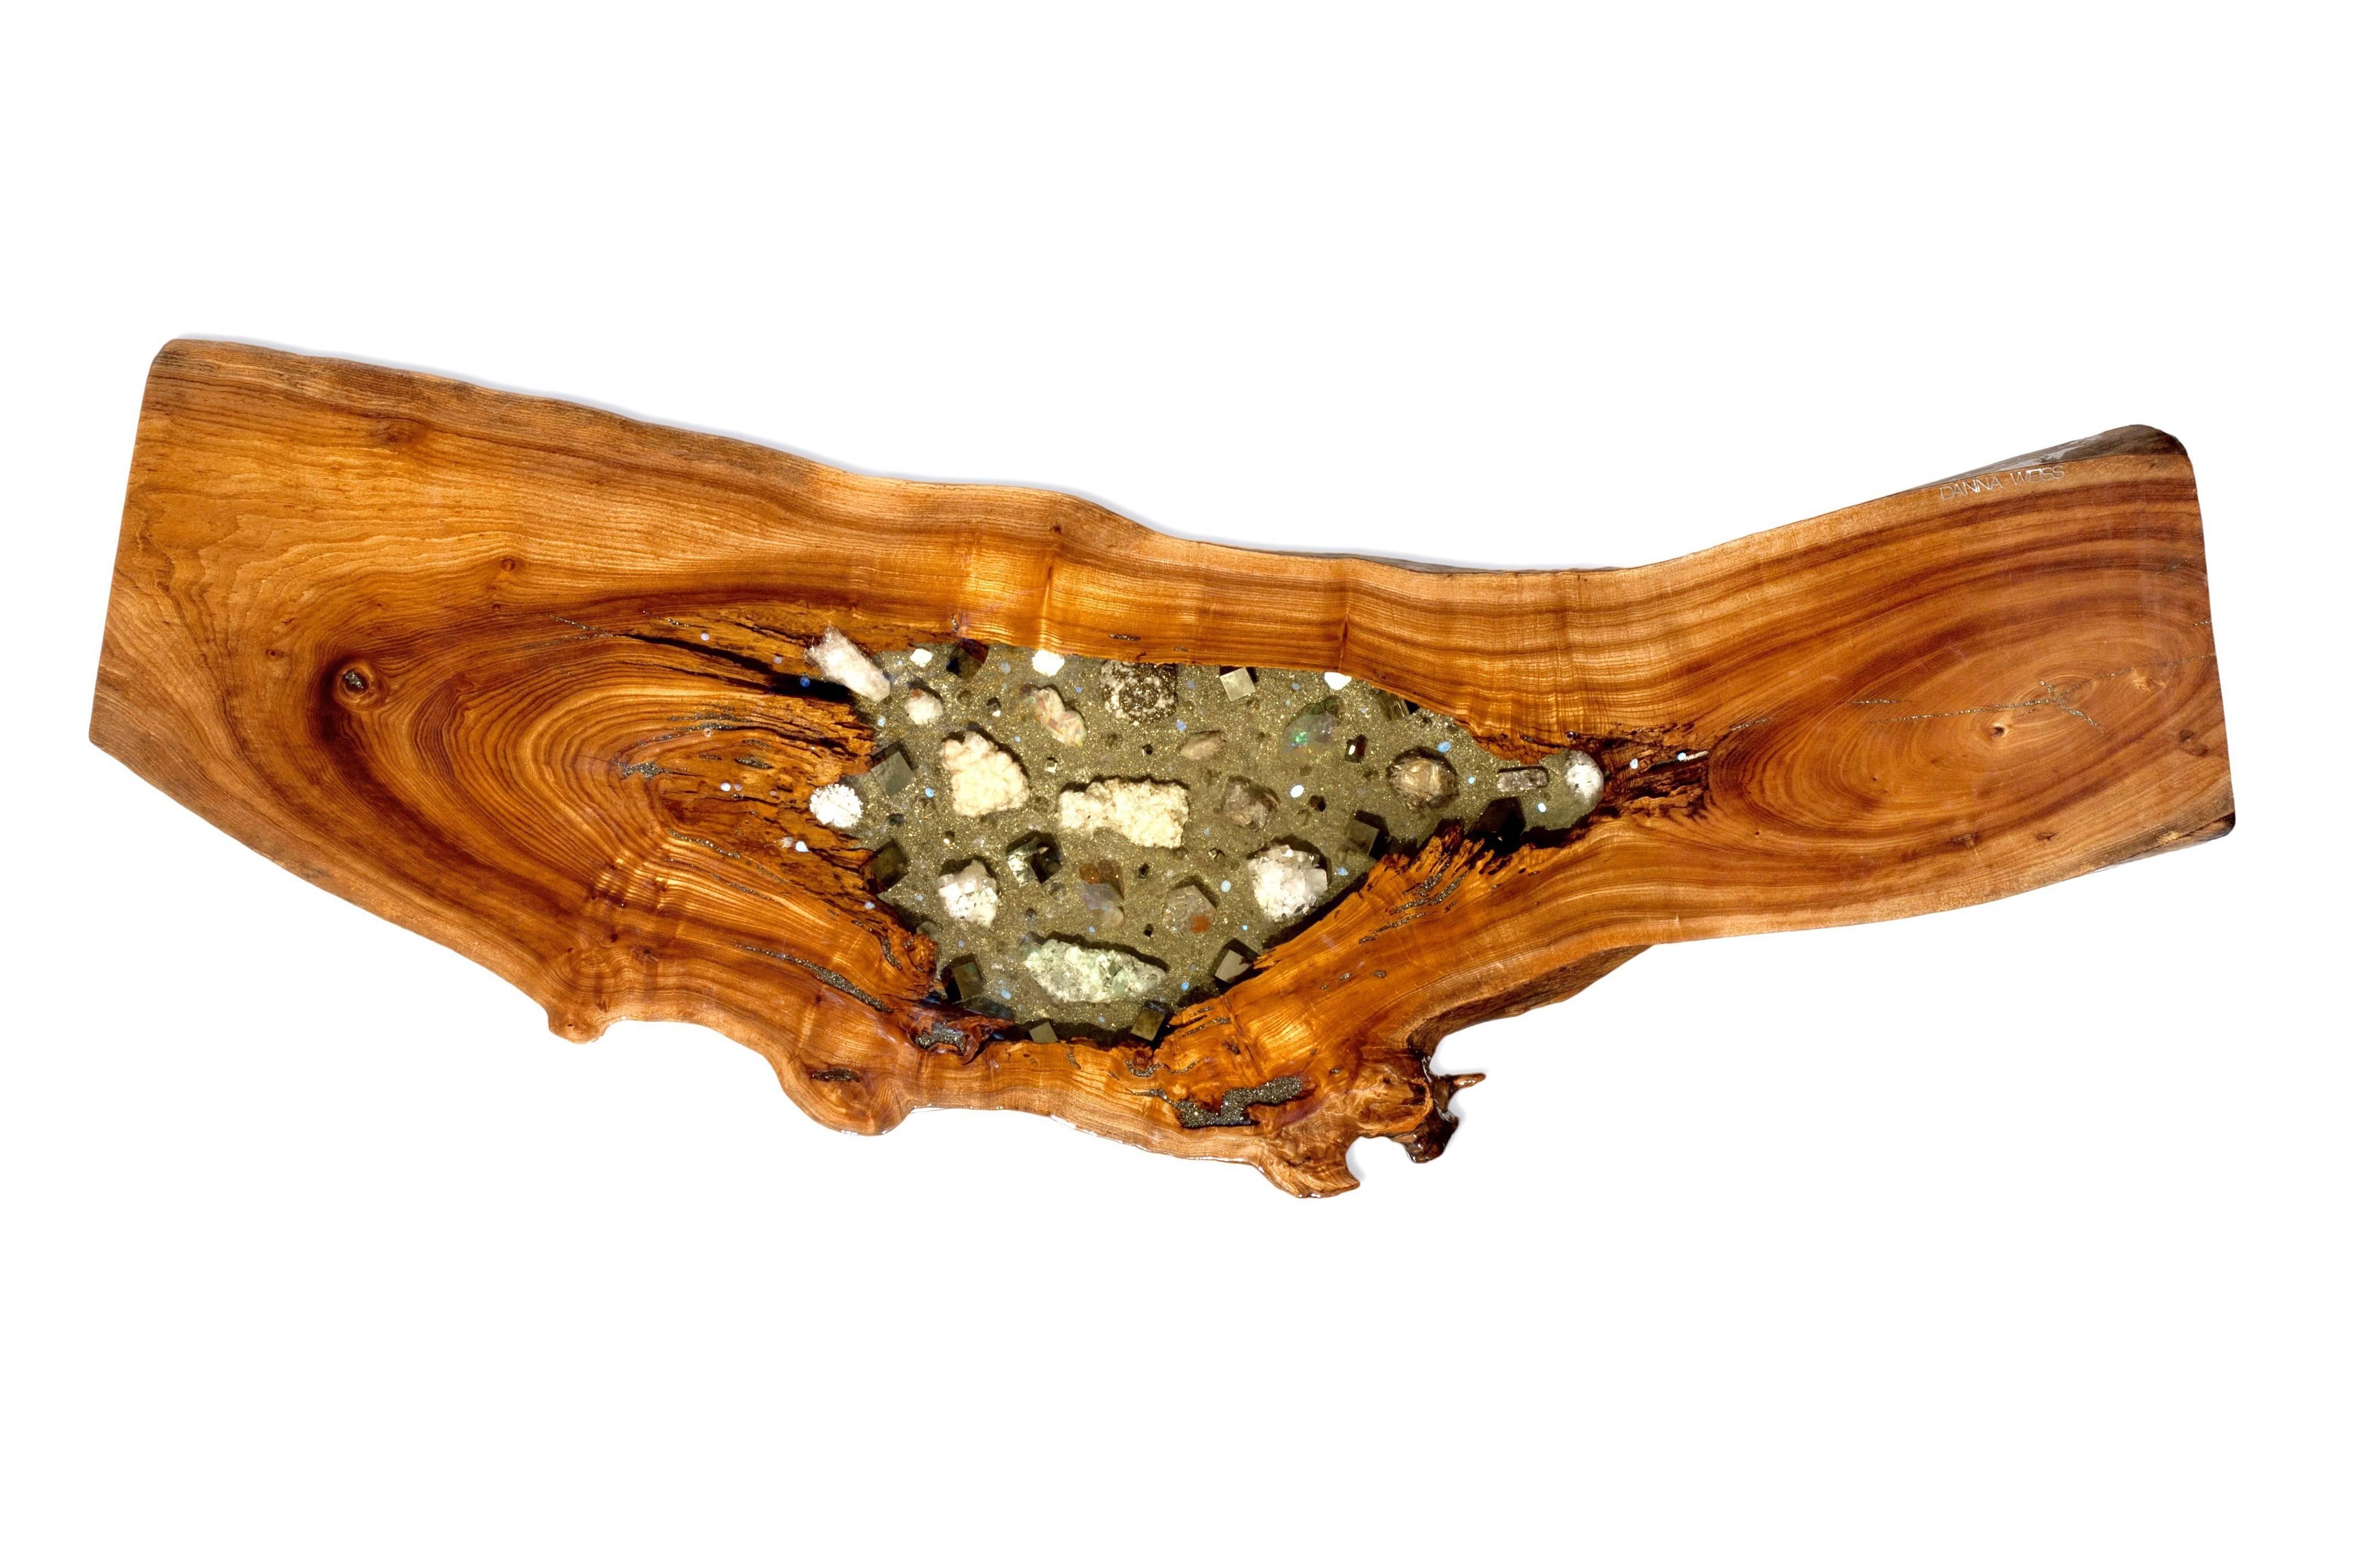 This is an incredible, one of a kind, handmade coffee table in four inch thick English Elm. Its crystal and gemstone inlay has the most wonderful specimens of Rainbow Opal, Apotholite, Calcite, rare Pyrite cubes, Danburite, Rainbow Painted Quartz,